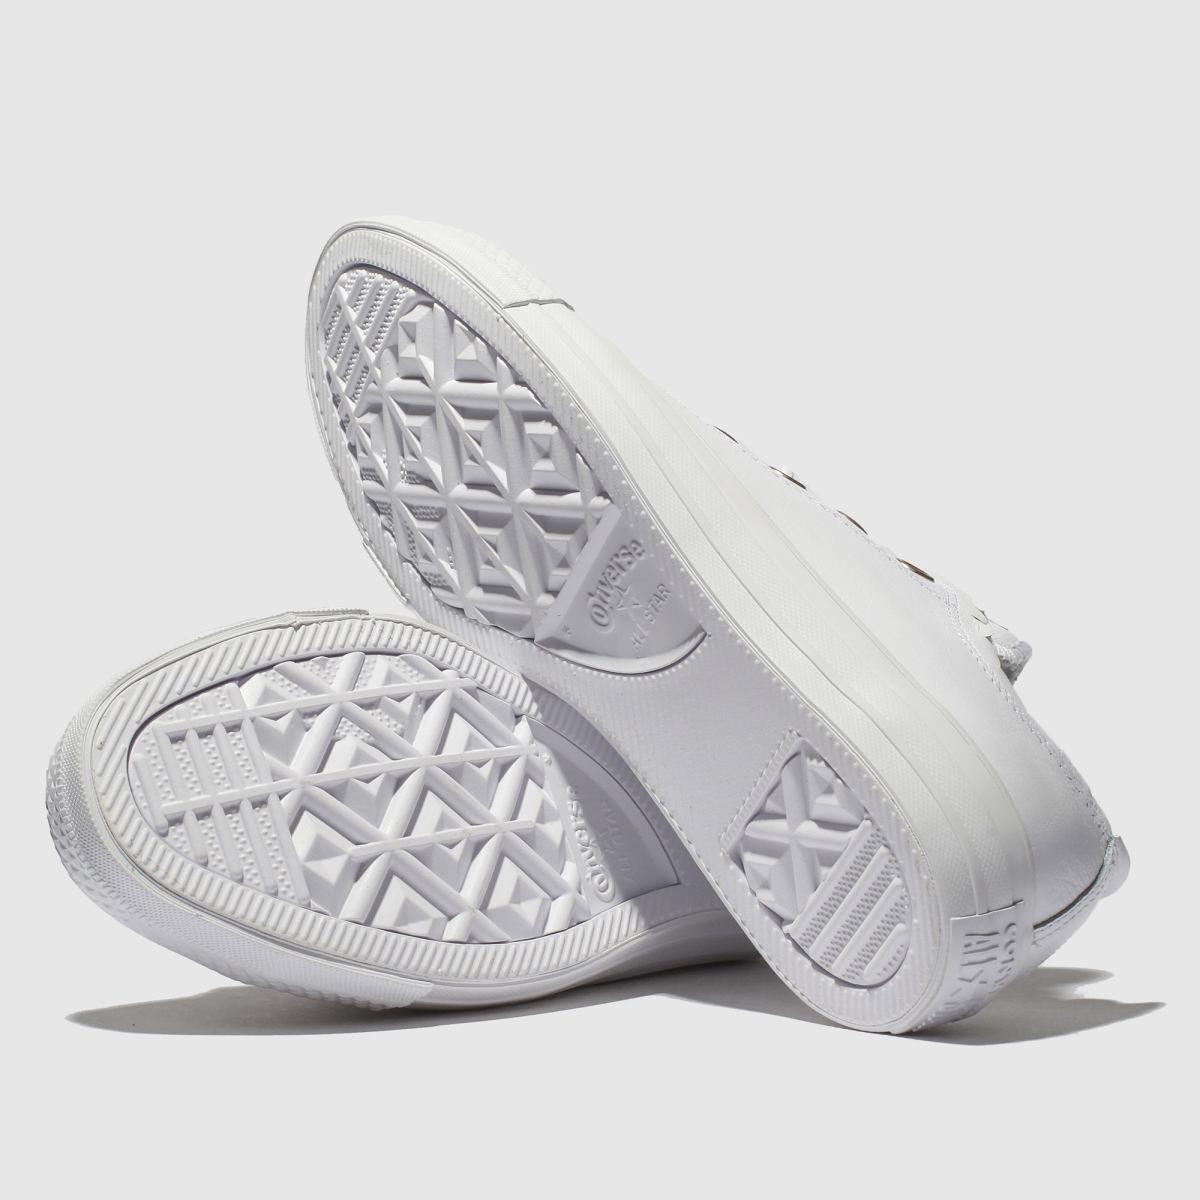 Converse All Star Frilly Thrills Ox Trainers in White | Lyst UK